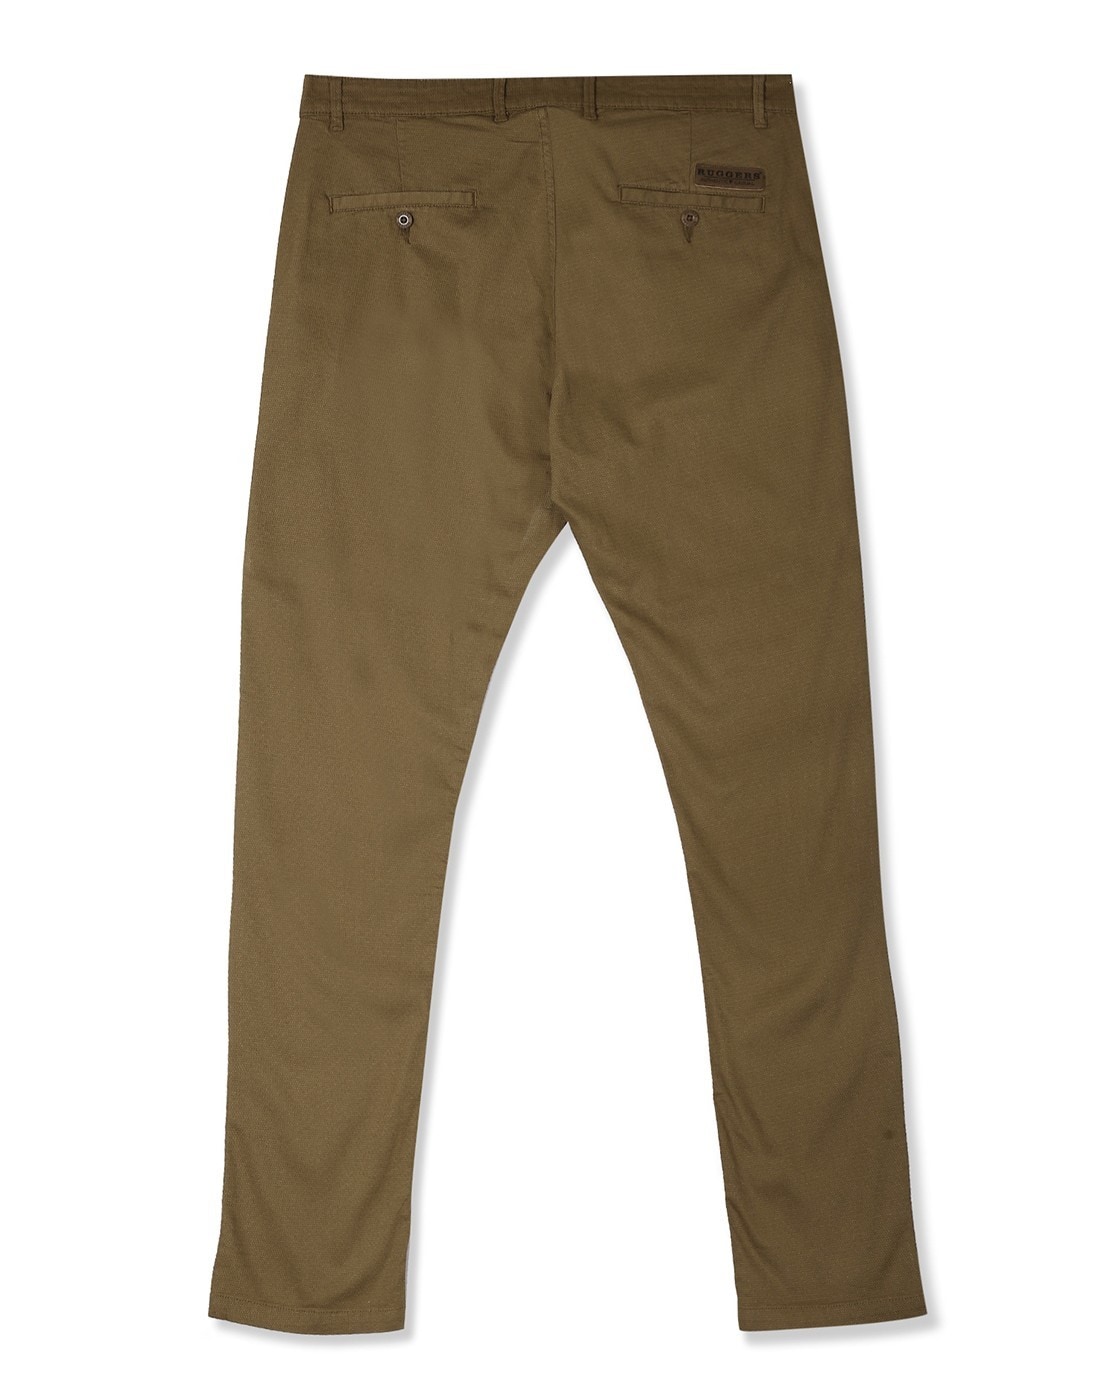 Ruggers Blue Slim -Fit Trousers - Buy Ruggers Blue Slim -Fit Trousers  Online at Best Prices in India on Snapdeal